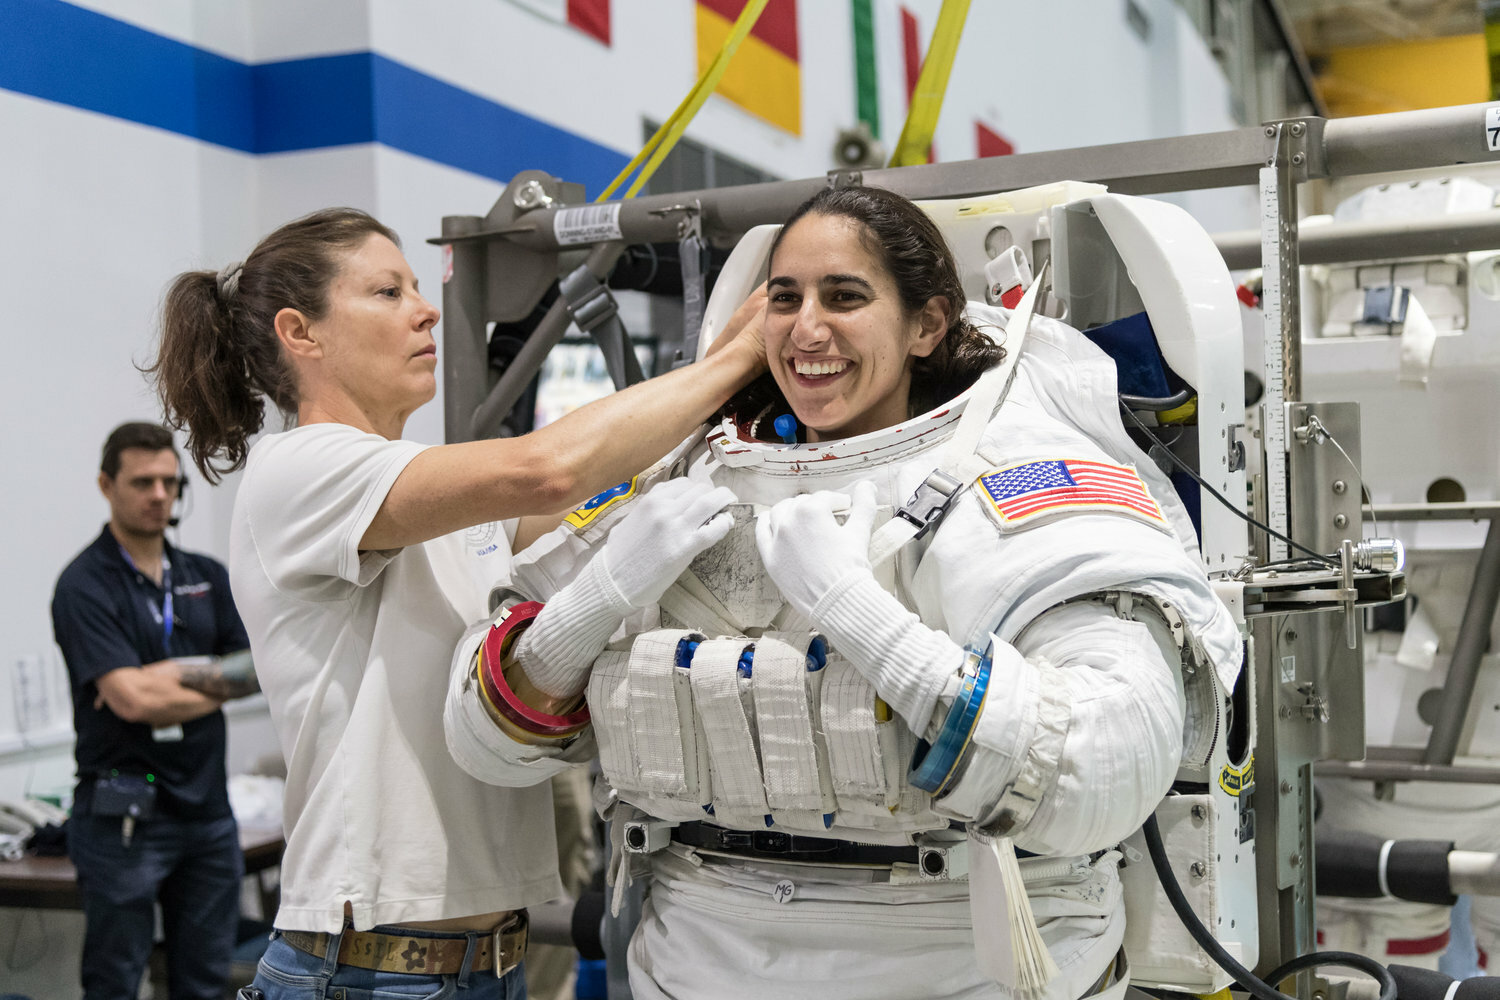 Jasmin Moghbeli was helped into a spacesuit before underwater spacewalk training at the Johnson Space Center’s Neutral Buoyancy Laboratory in Houston.